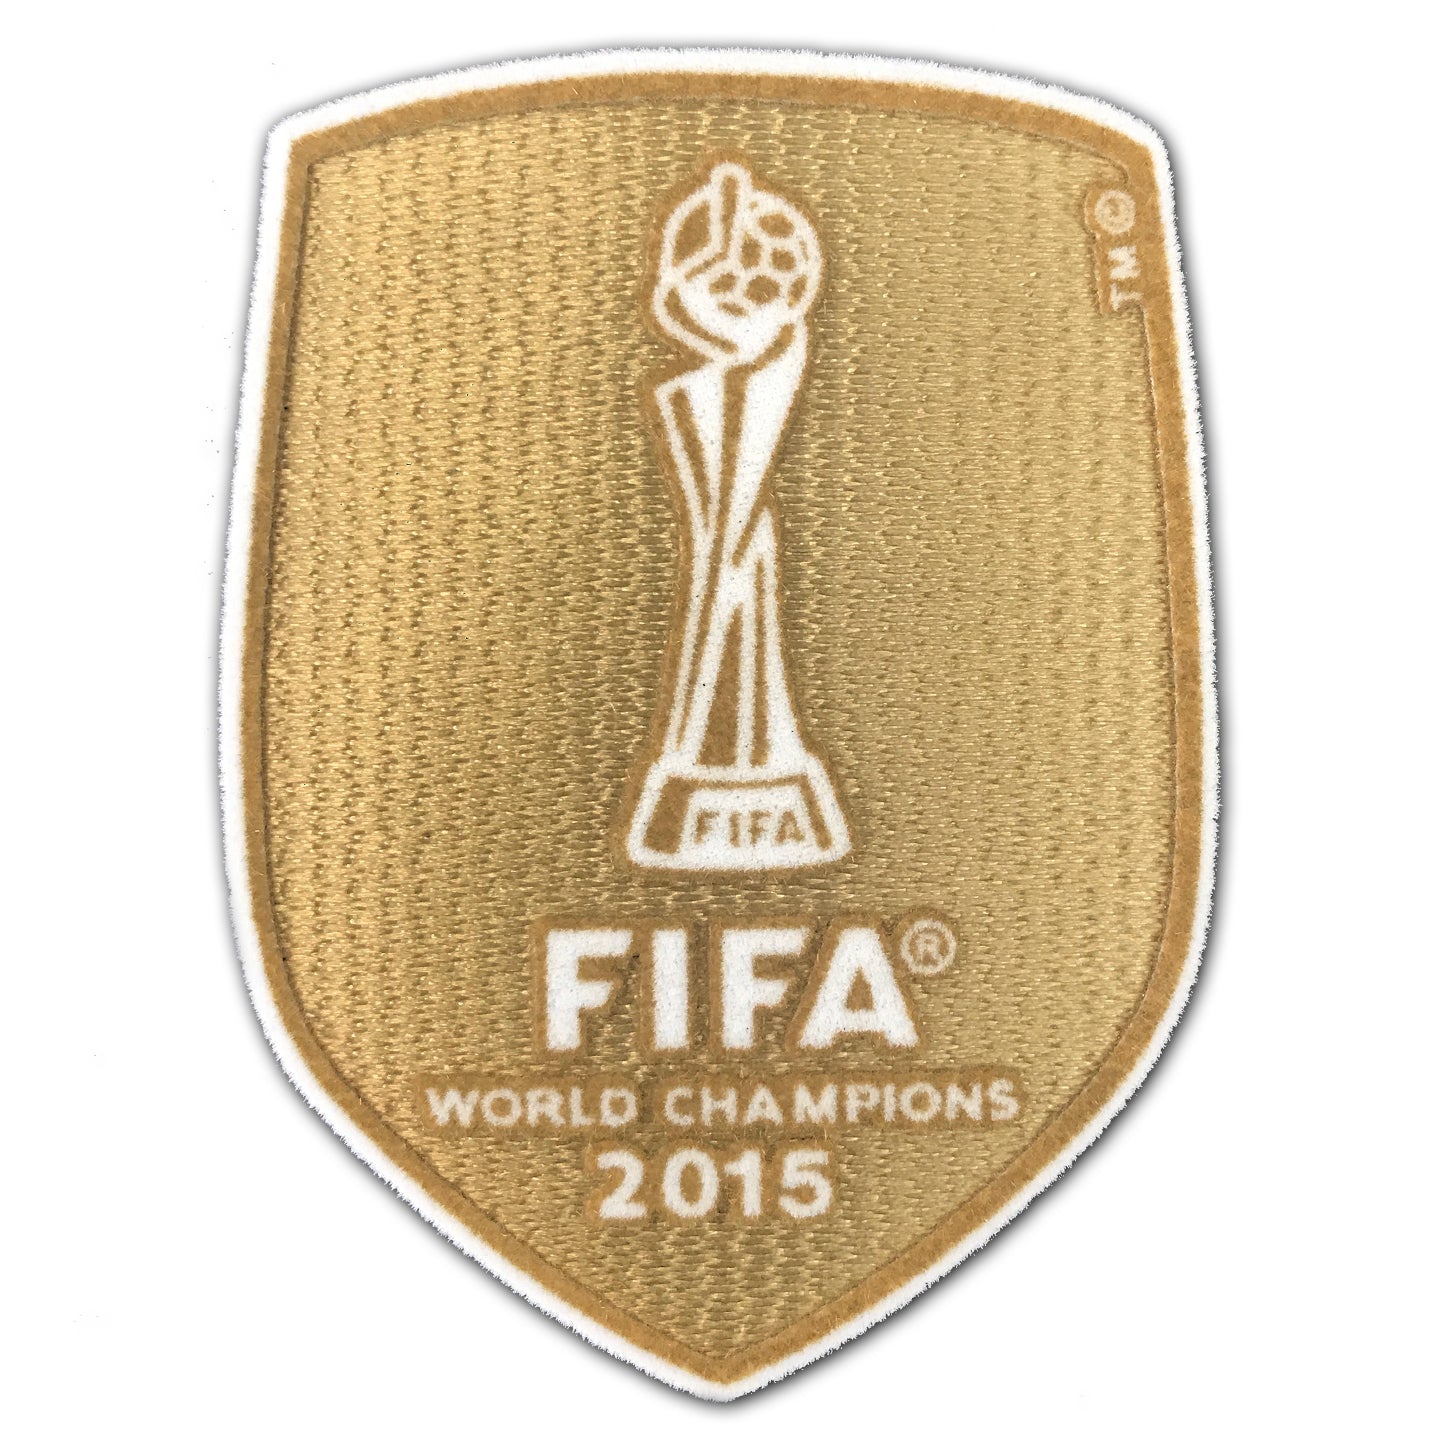 FIFA USA Womens World Cup Champions 2015 Patch (Gold)